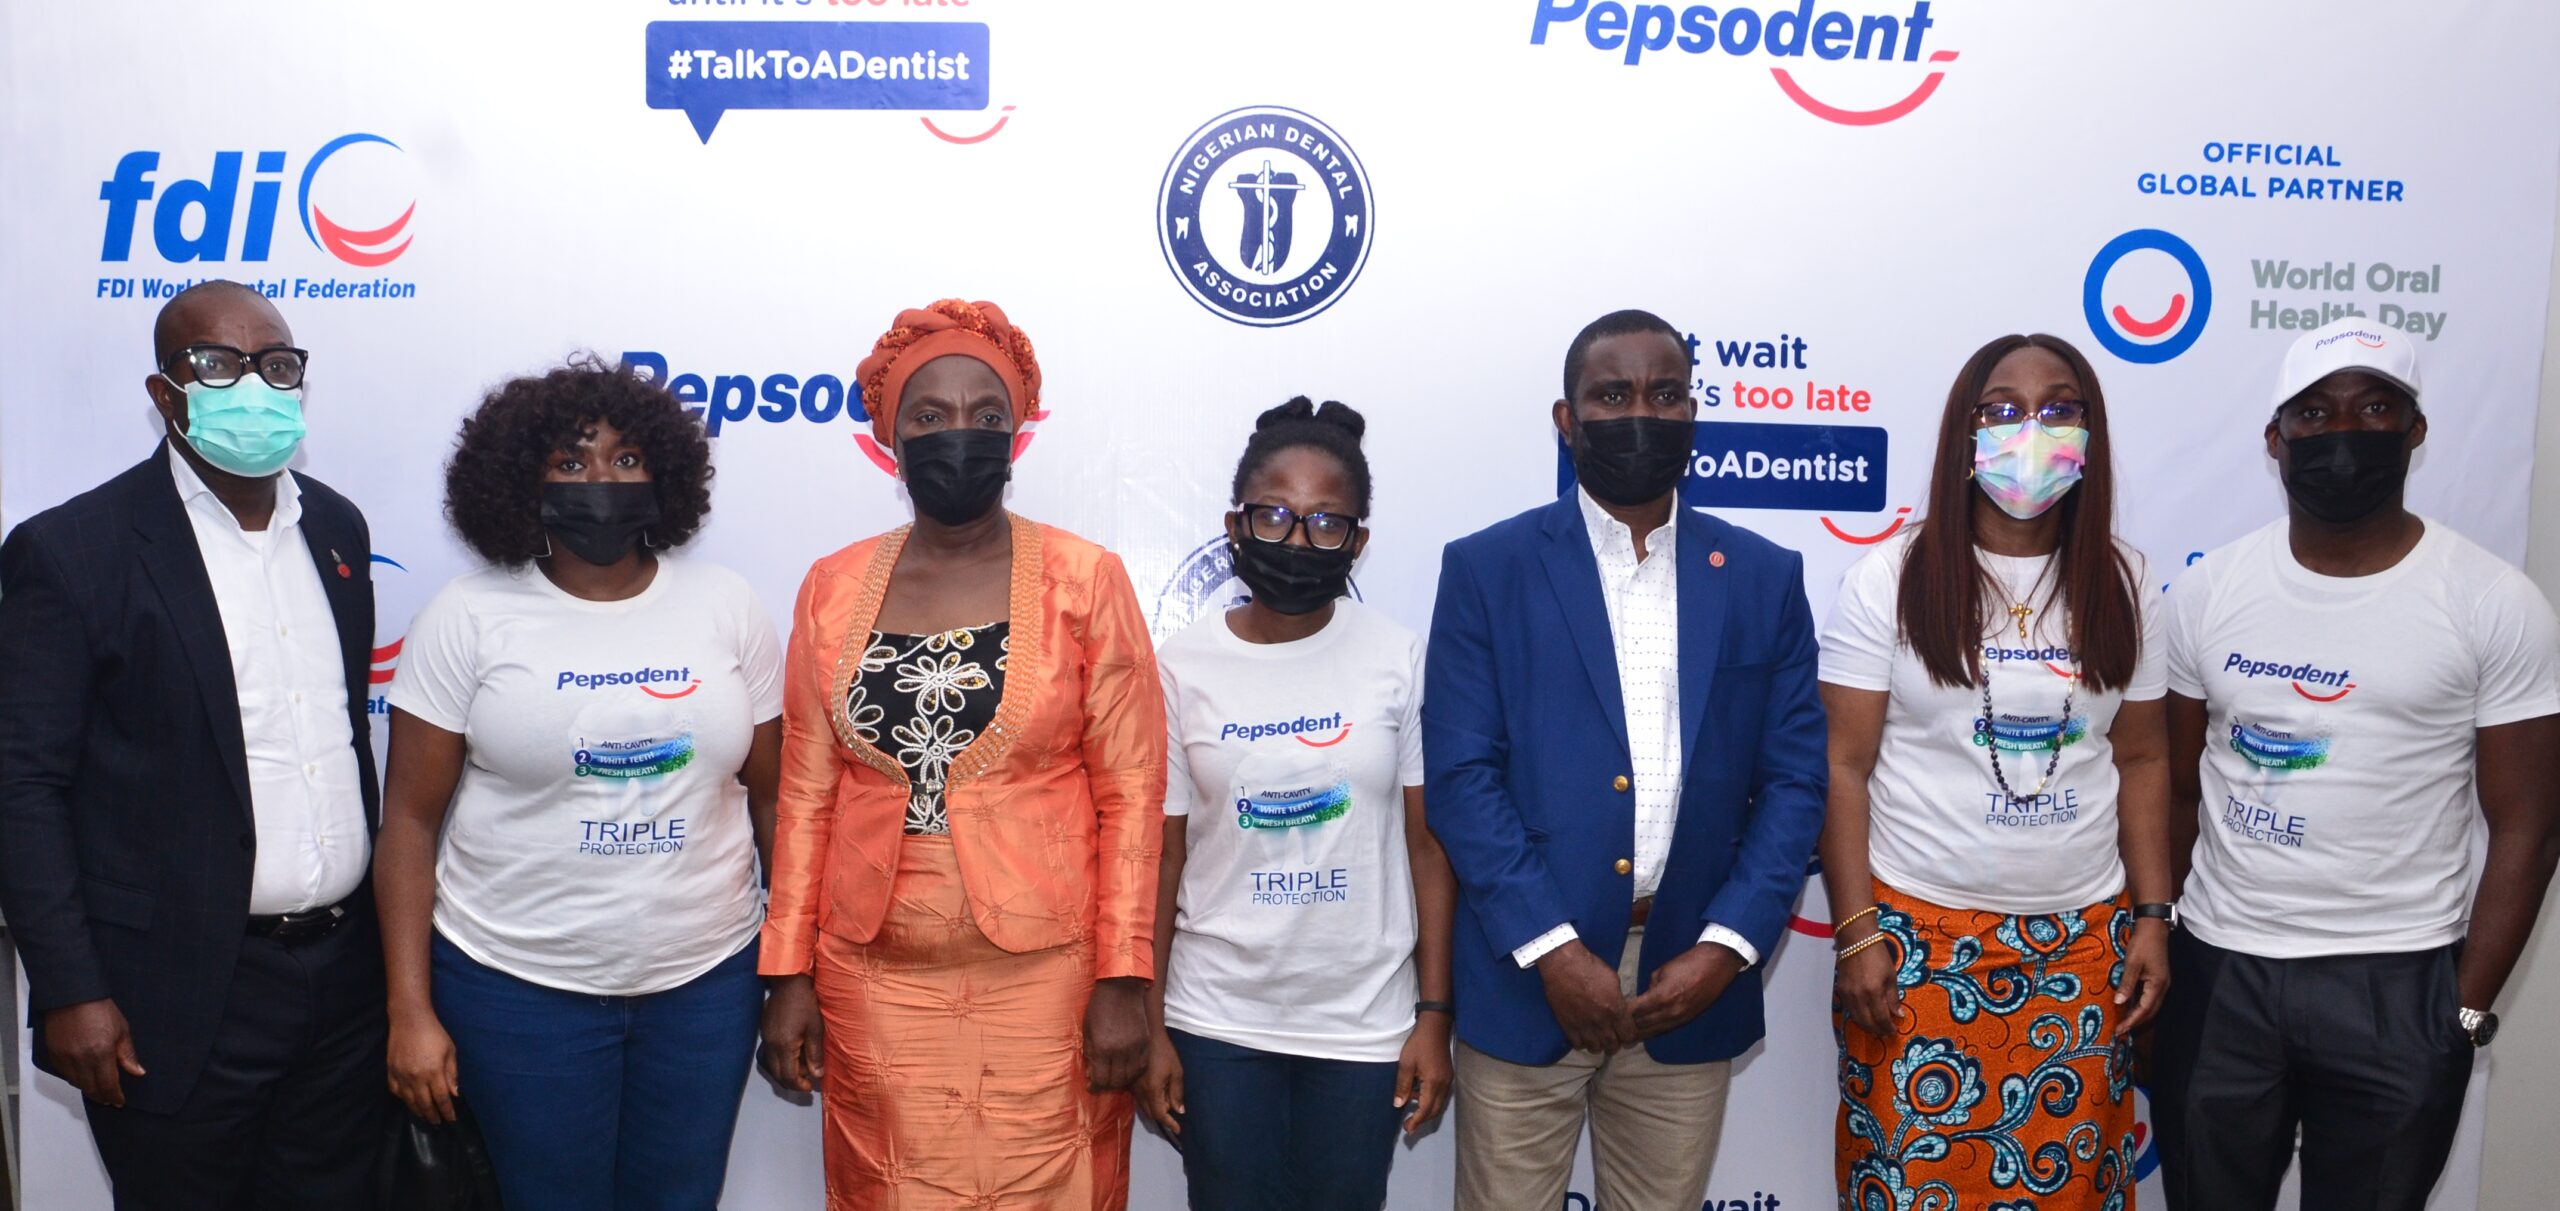 2022 World Oral Health Day: Pepsodent is bridging ... Image